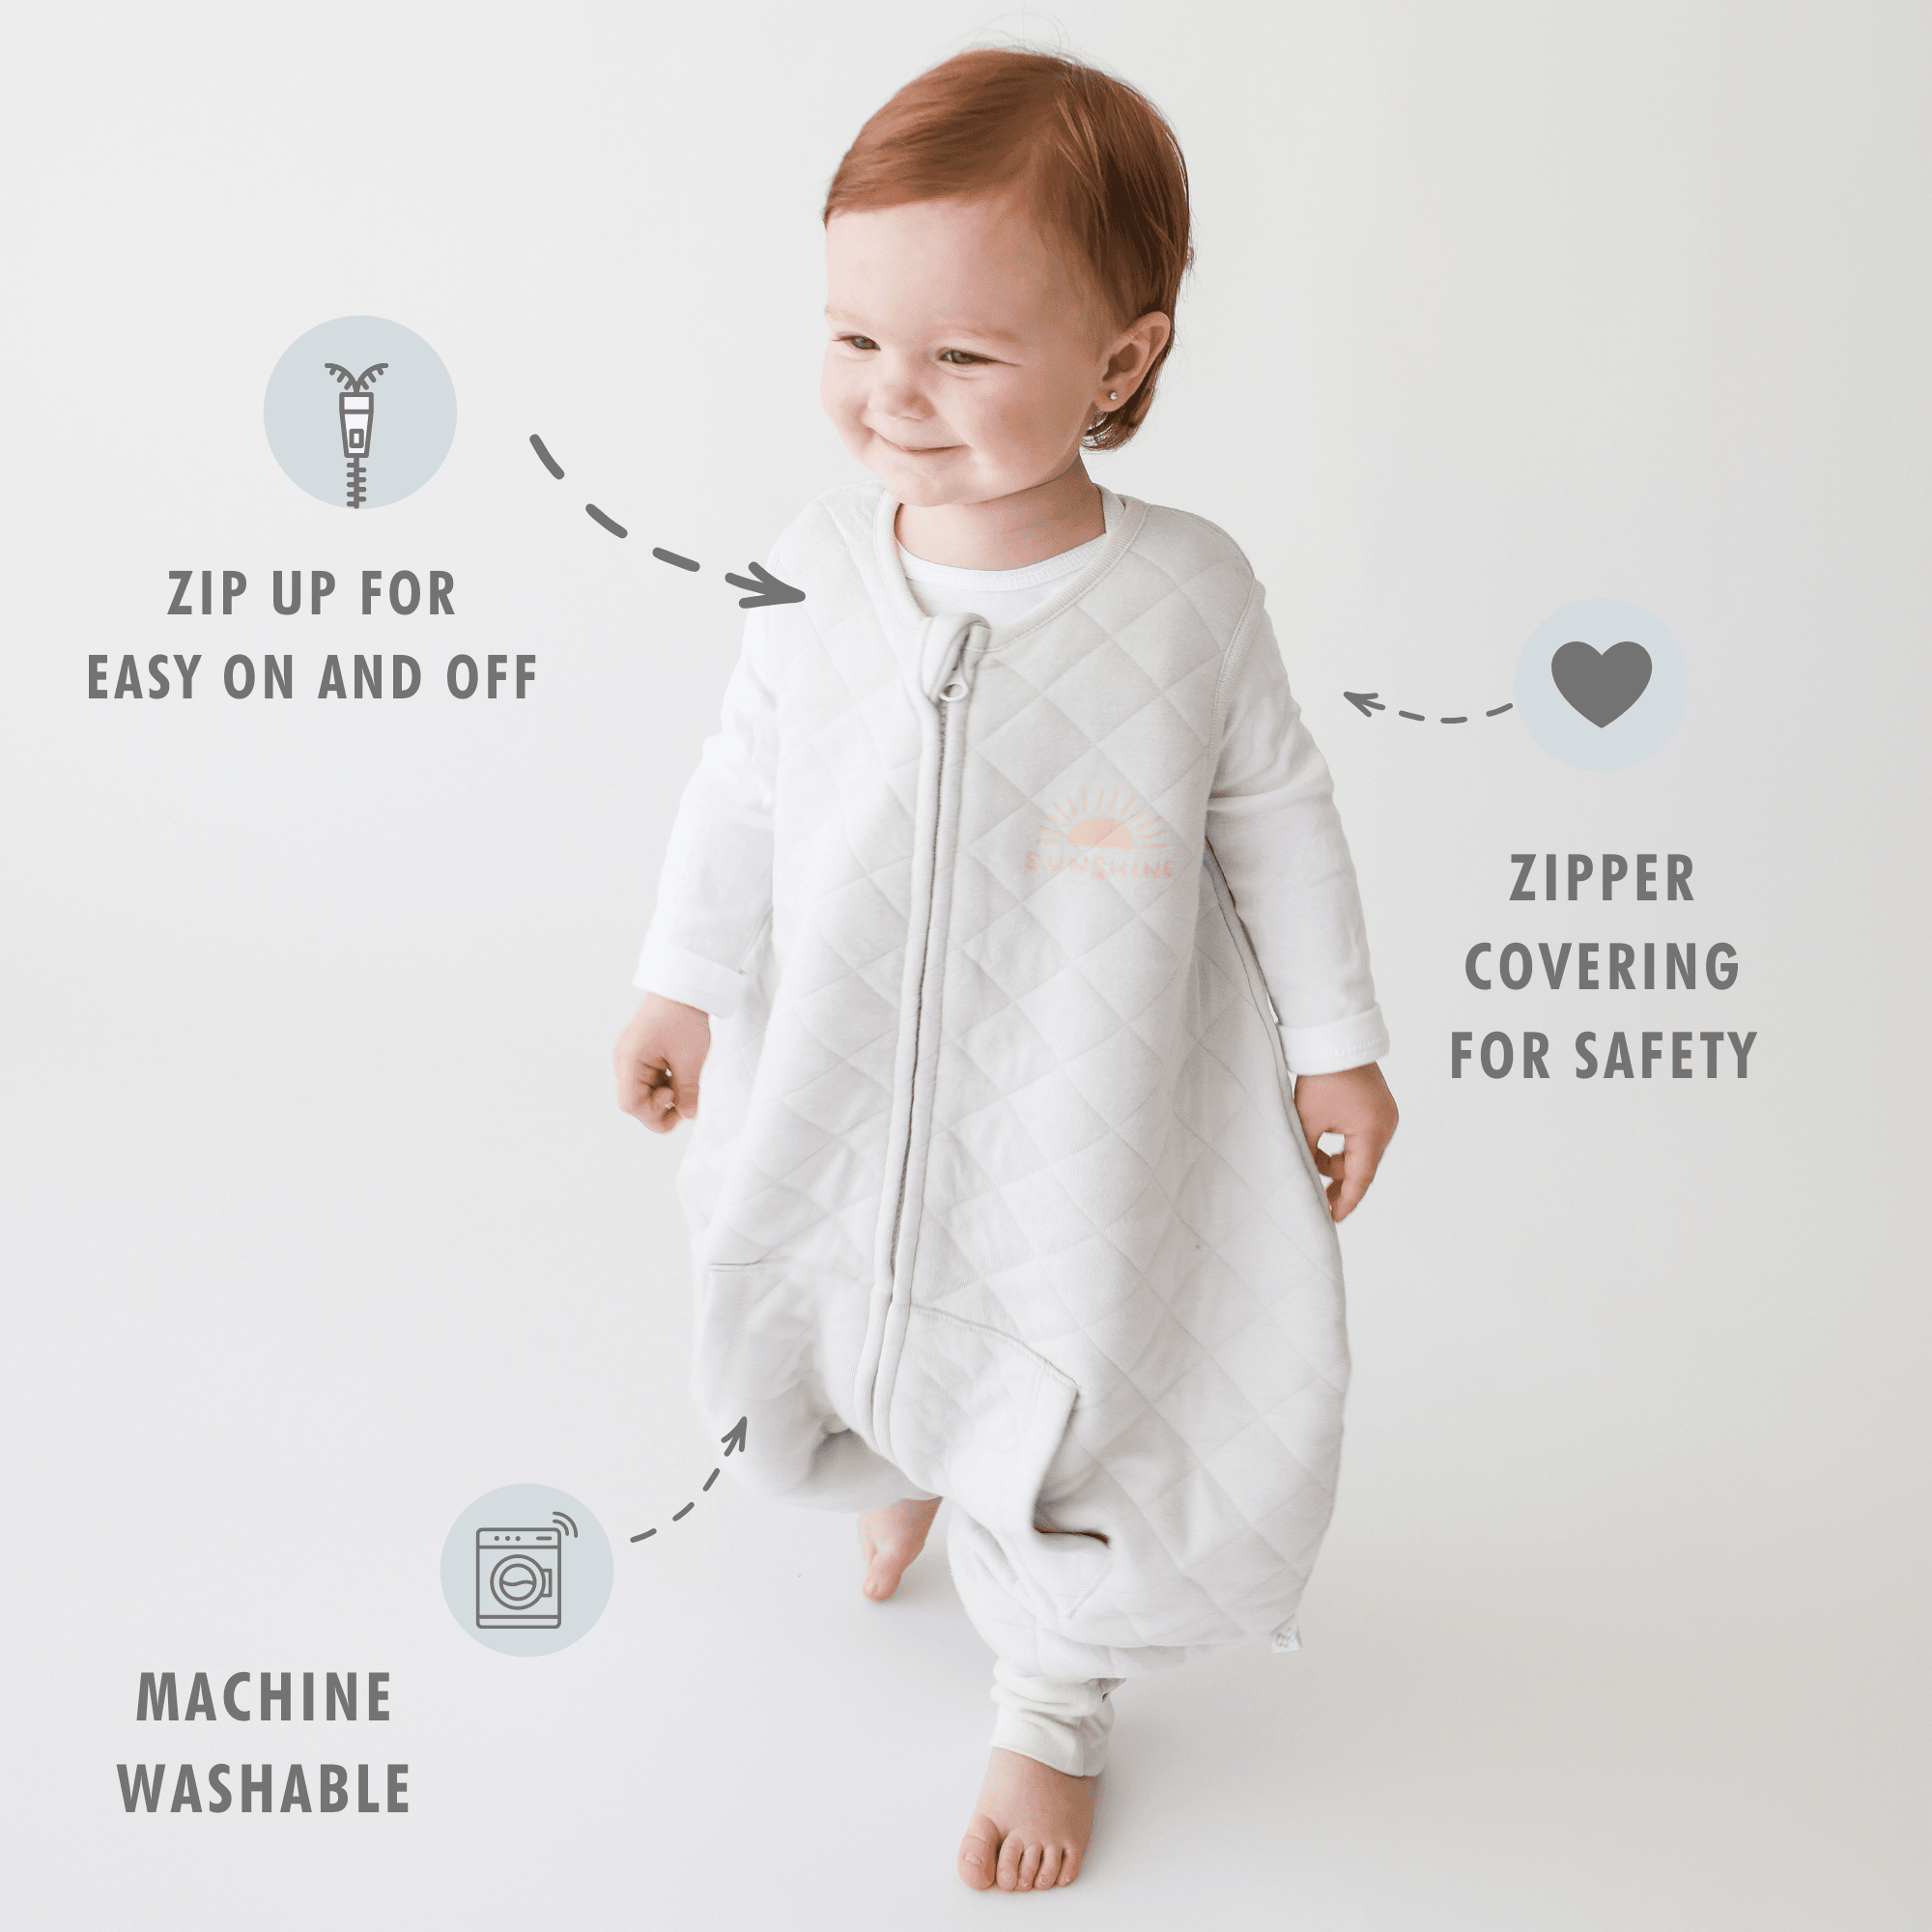 Tealbee Dreamsuit Sleep sack - zip up for easy on and off, zipper covering for safety, machine washable